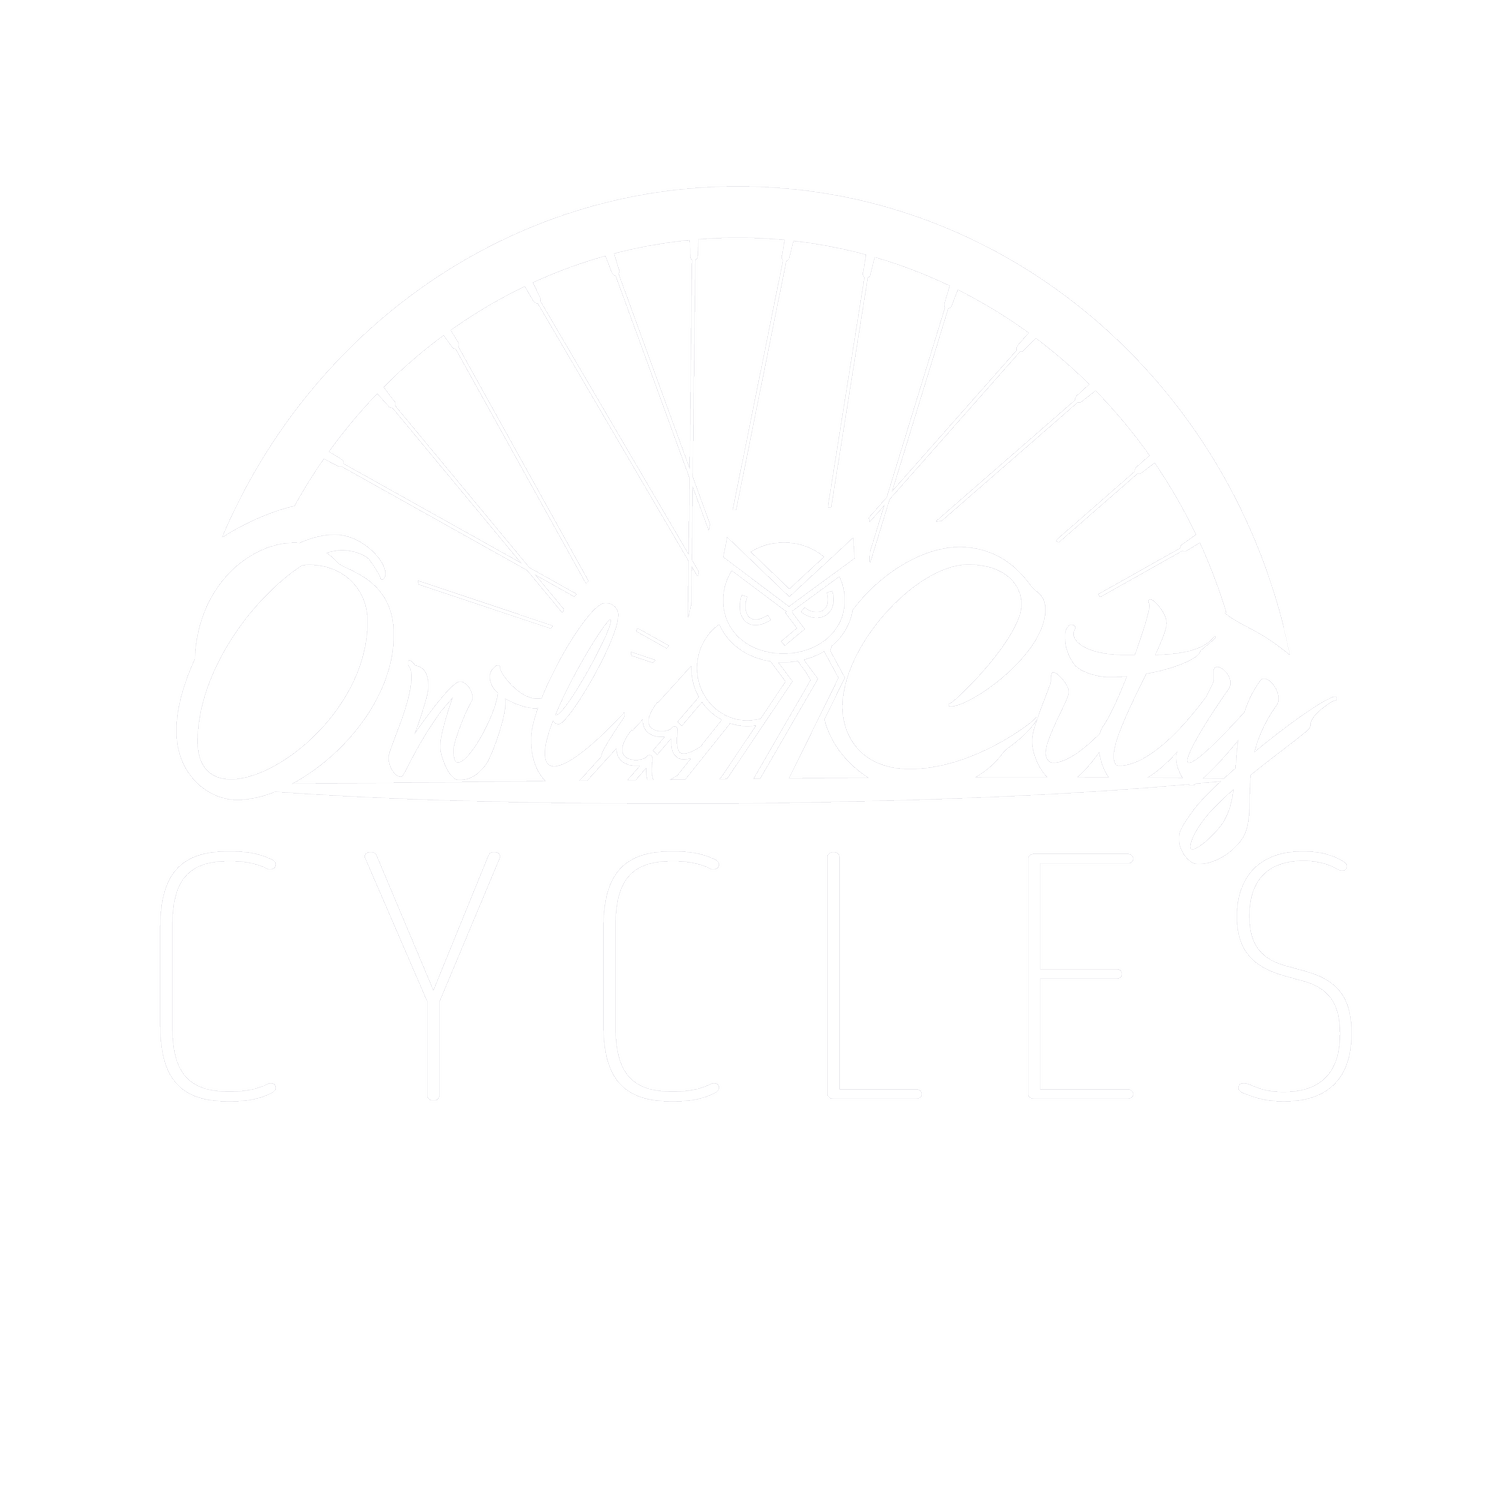 Owl City Cycles